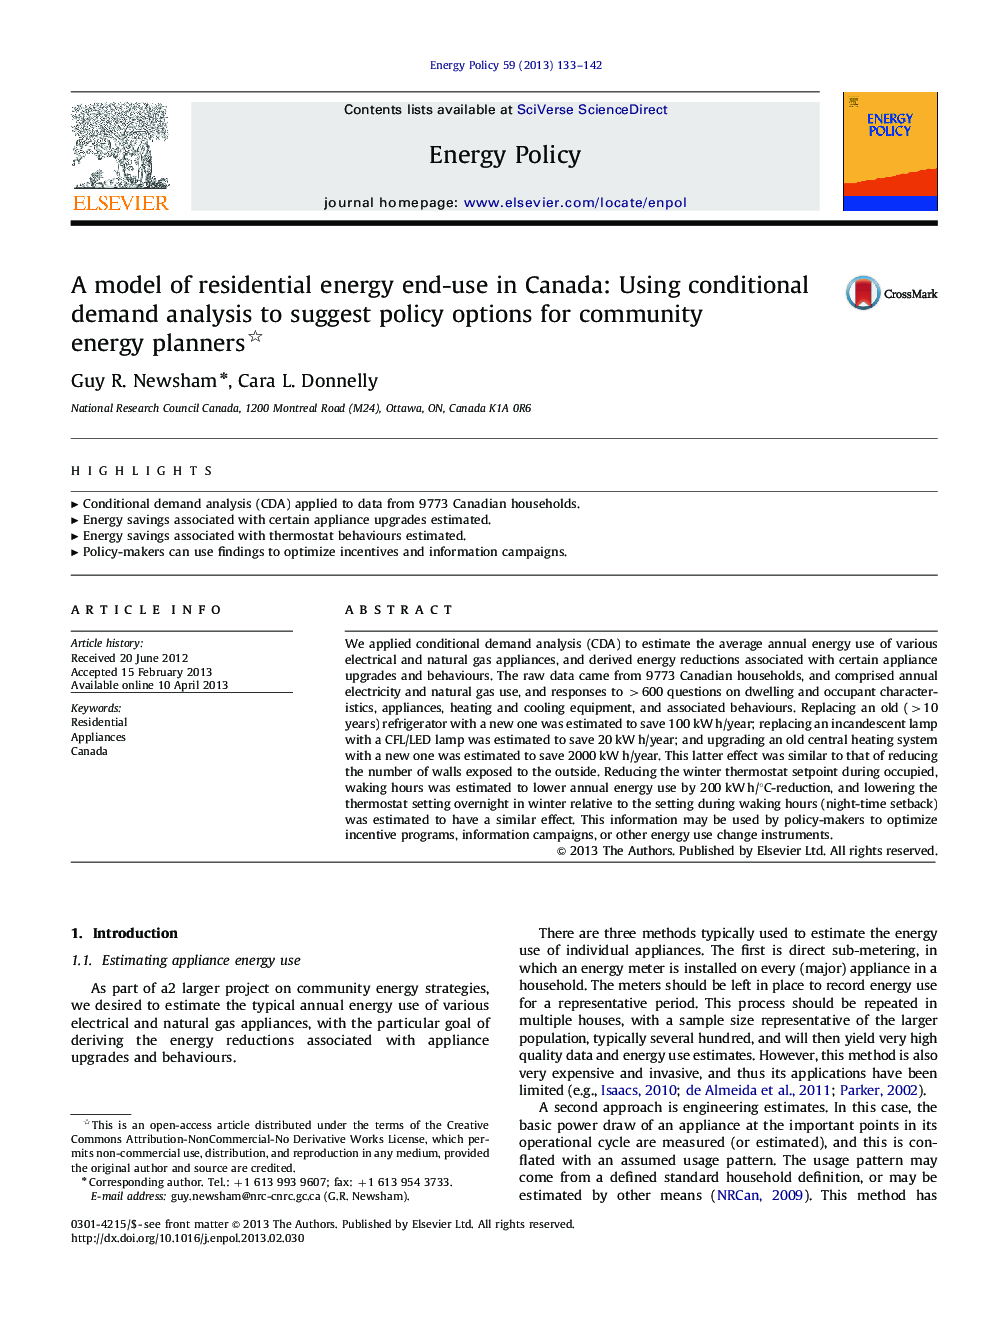 A model of residential energy end-use in Canada: Using conditional demand analysis to suggest policy options for community energy planners